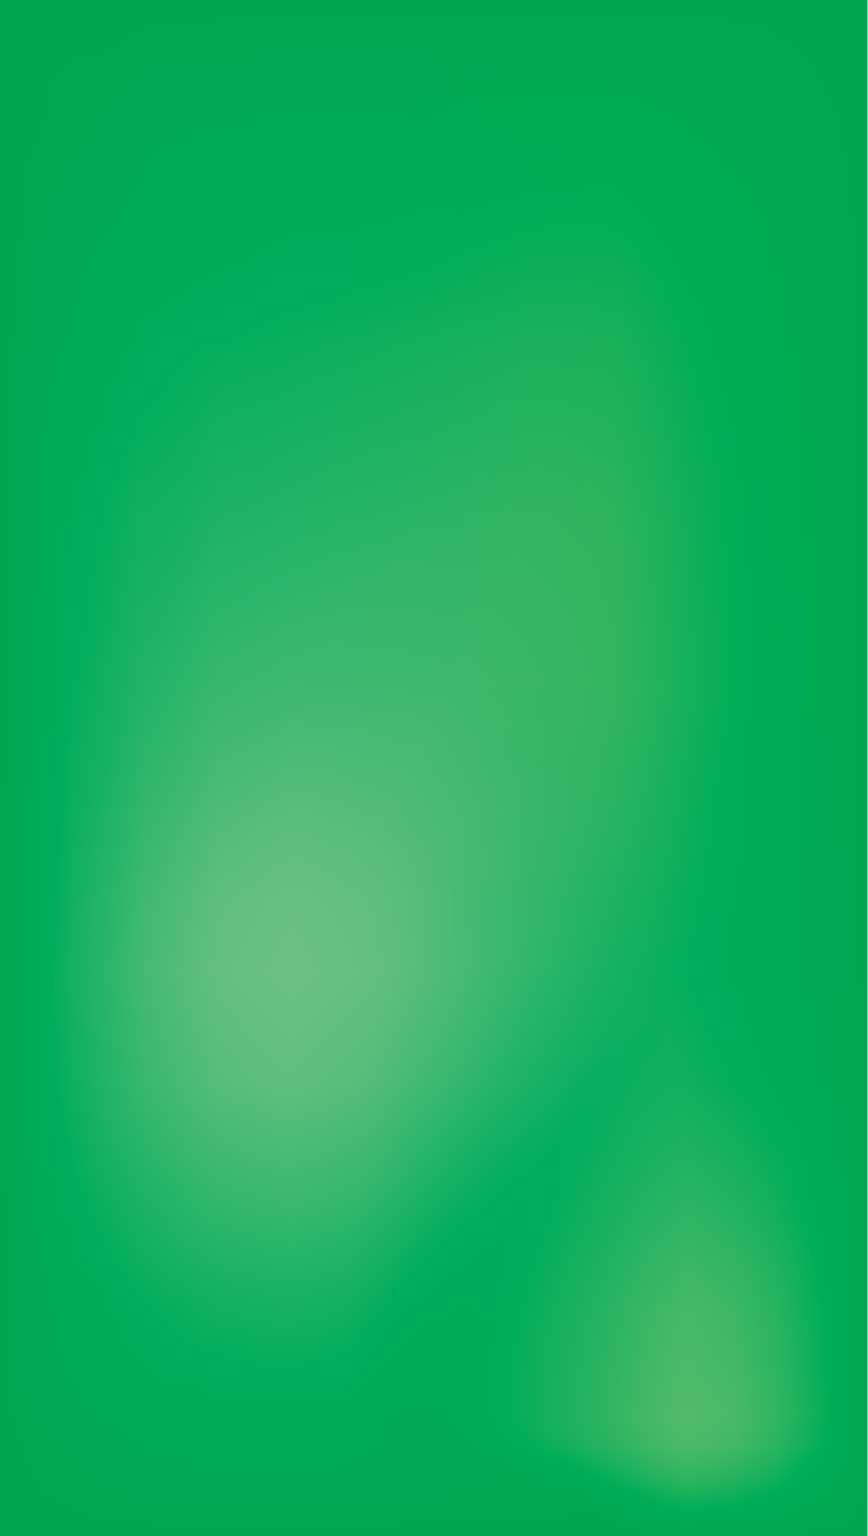 Solid Color HD iPhone Wallpapers - Wallpaper Cave